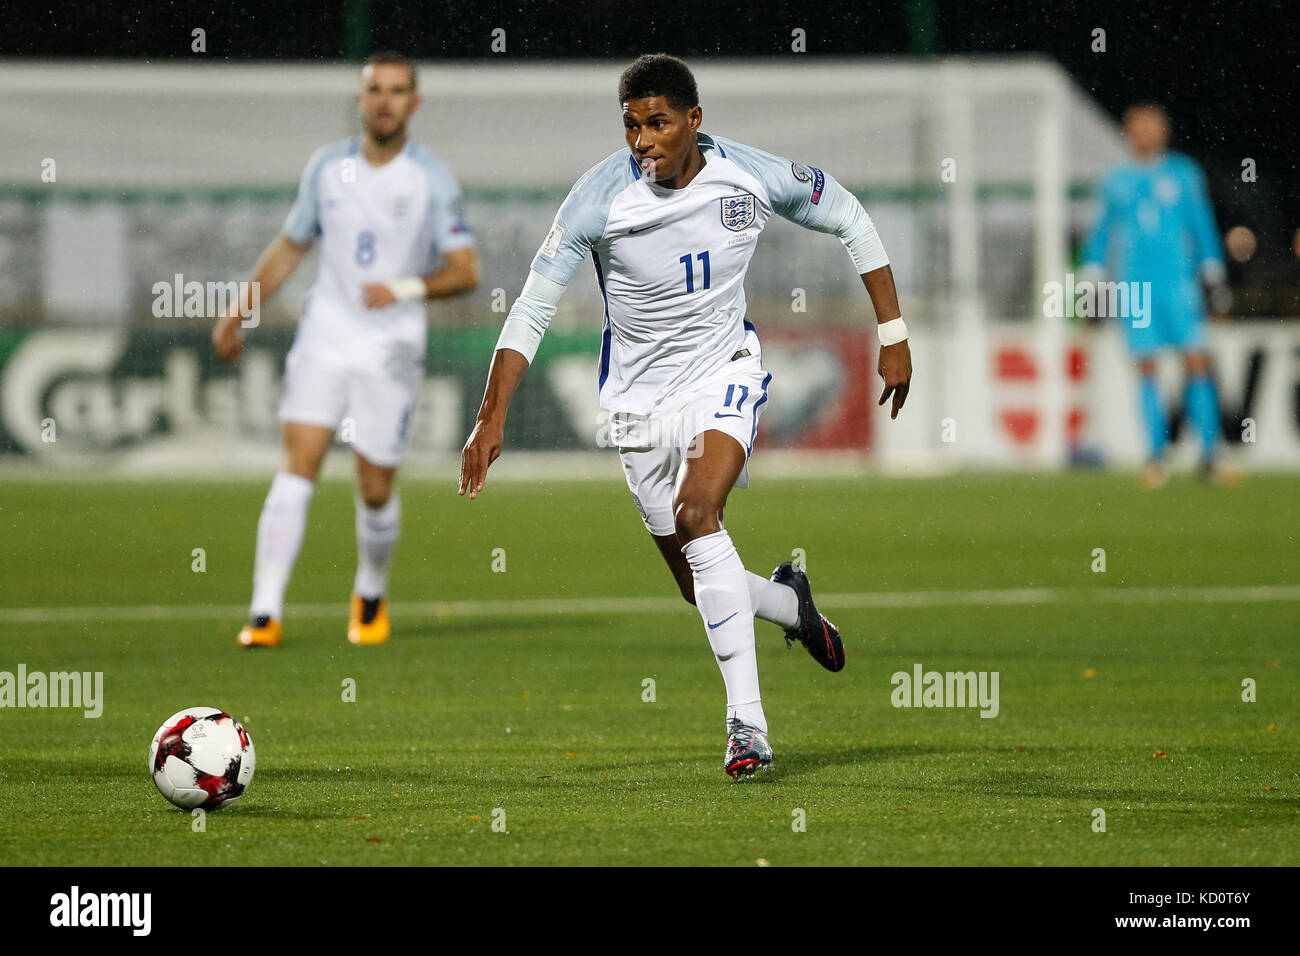 Vilnius, Lithuania. 8th Oct, 2017. Marcus Rashford of England during the FIFA World Cup 2018 Qualifying Group F match between Lithuania and England at LFF Stadium on October 8th 2017 in Vilnius, Lithuania. . Credit: PHC Images/Alamy Live News Stock Photo